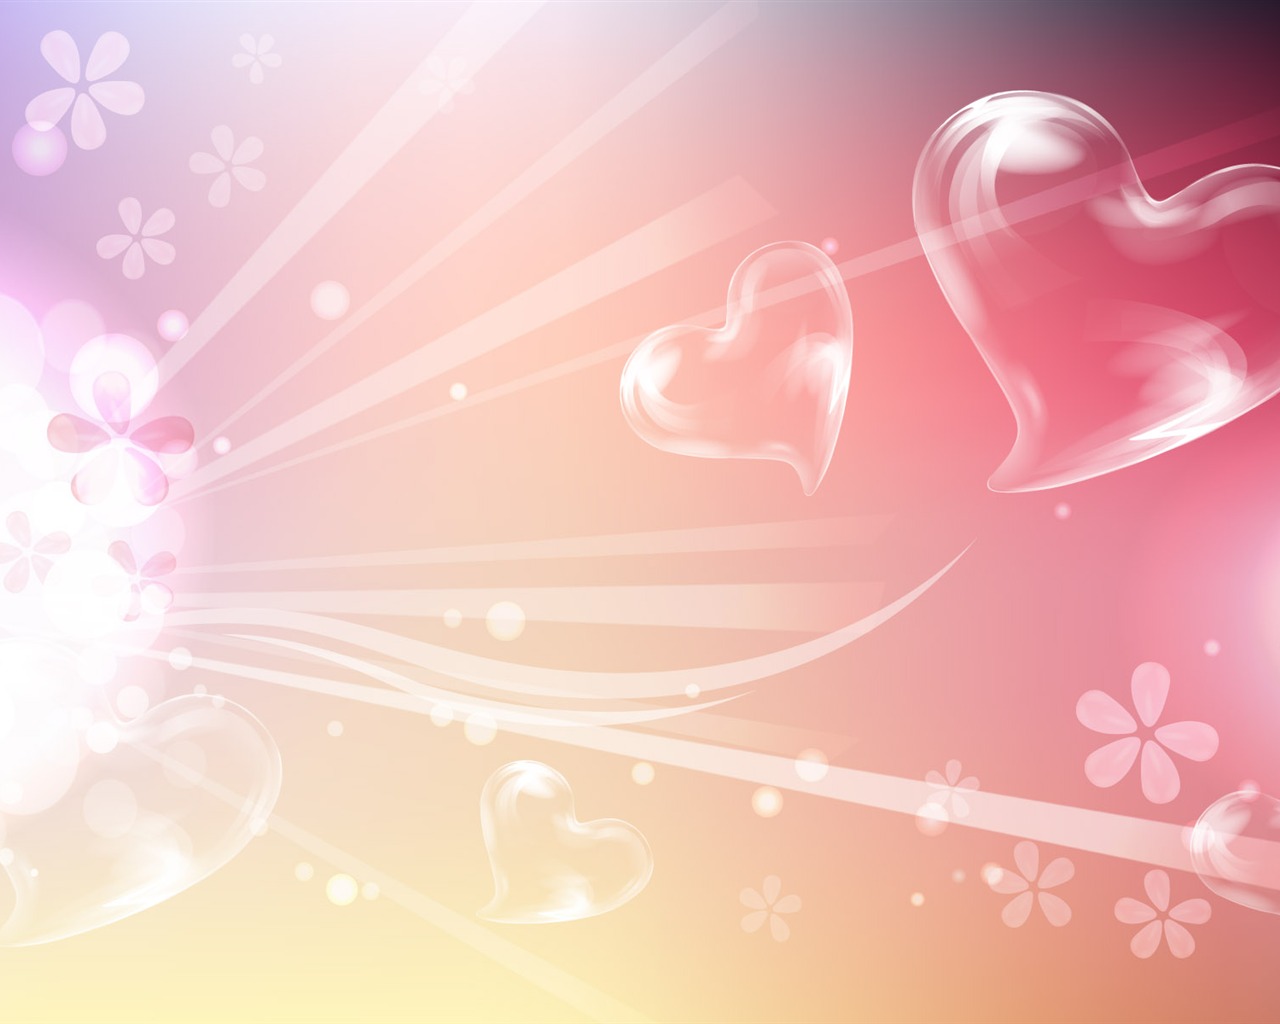 Valentine's Day Love Theme Wallpapers (2) #3 - 1280x1024